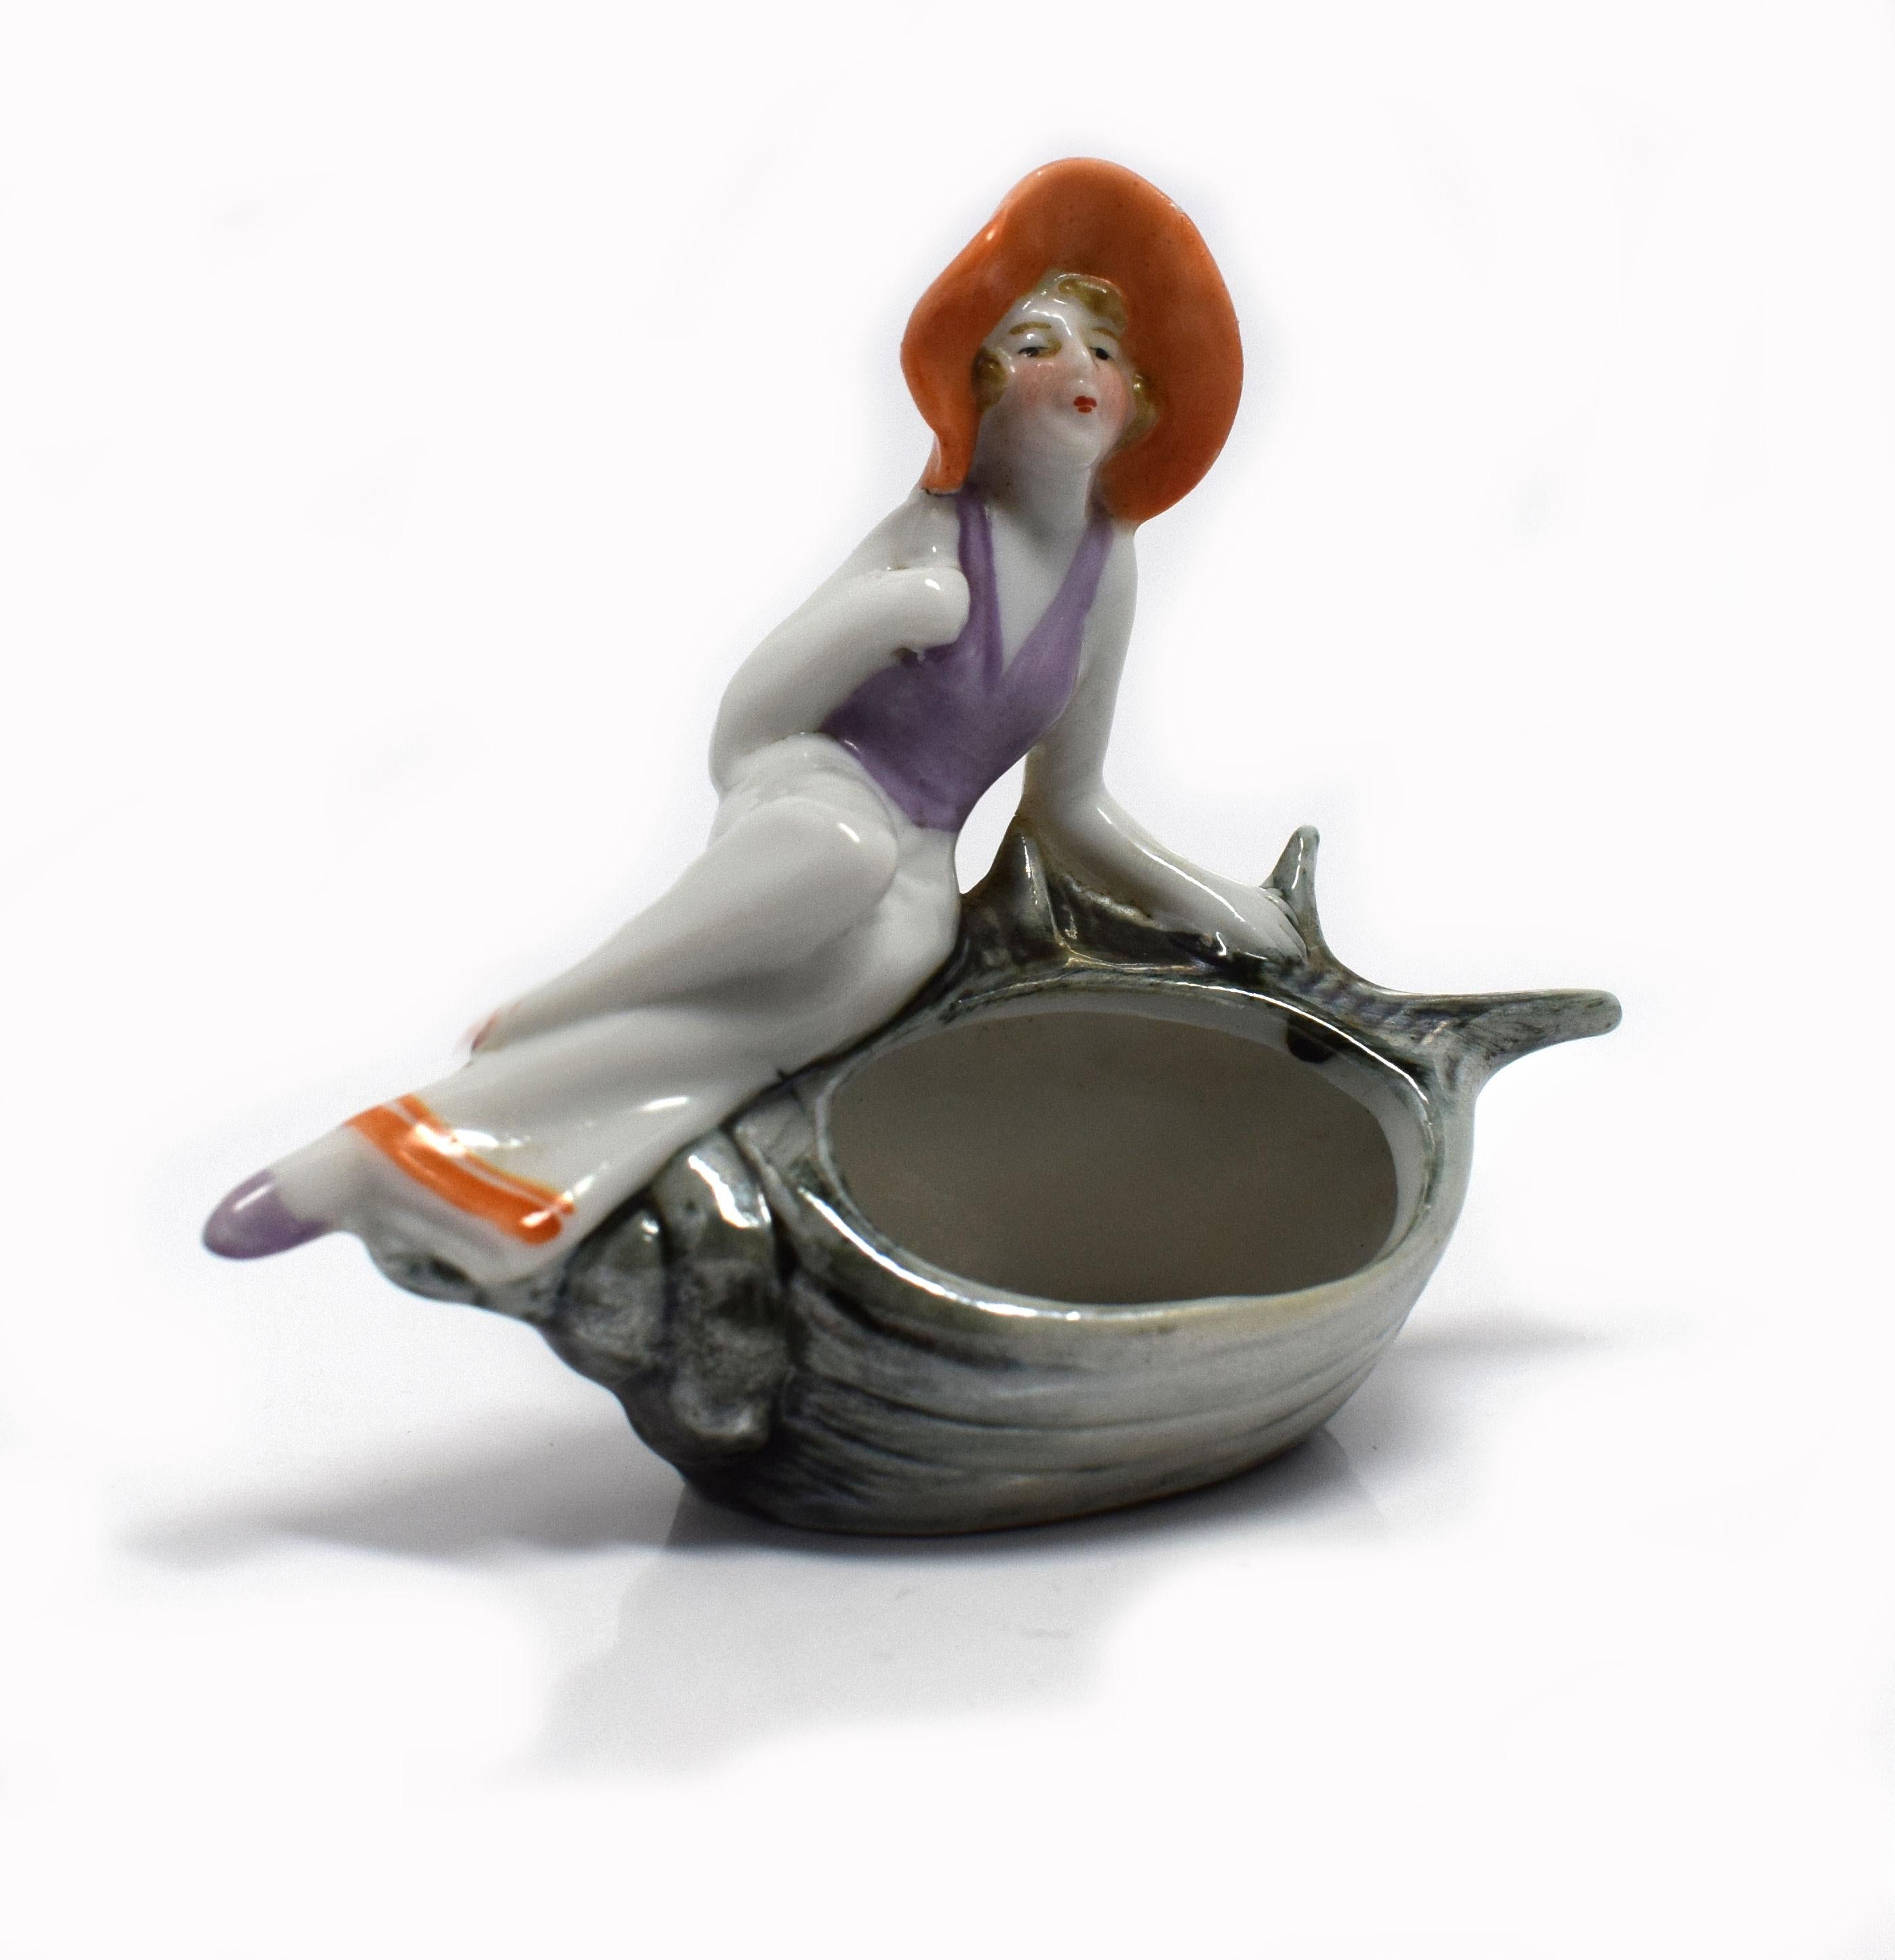 For your consideration is this delightful early 1930s Art Deco porcelain souvenir tray. Depicting a young girl dressed in a sailors outfit with a large floppy hat on a conch shell and originating from France. Beautifully hand painted with lovely